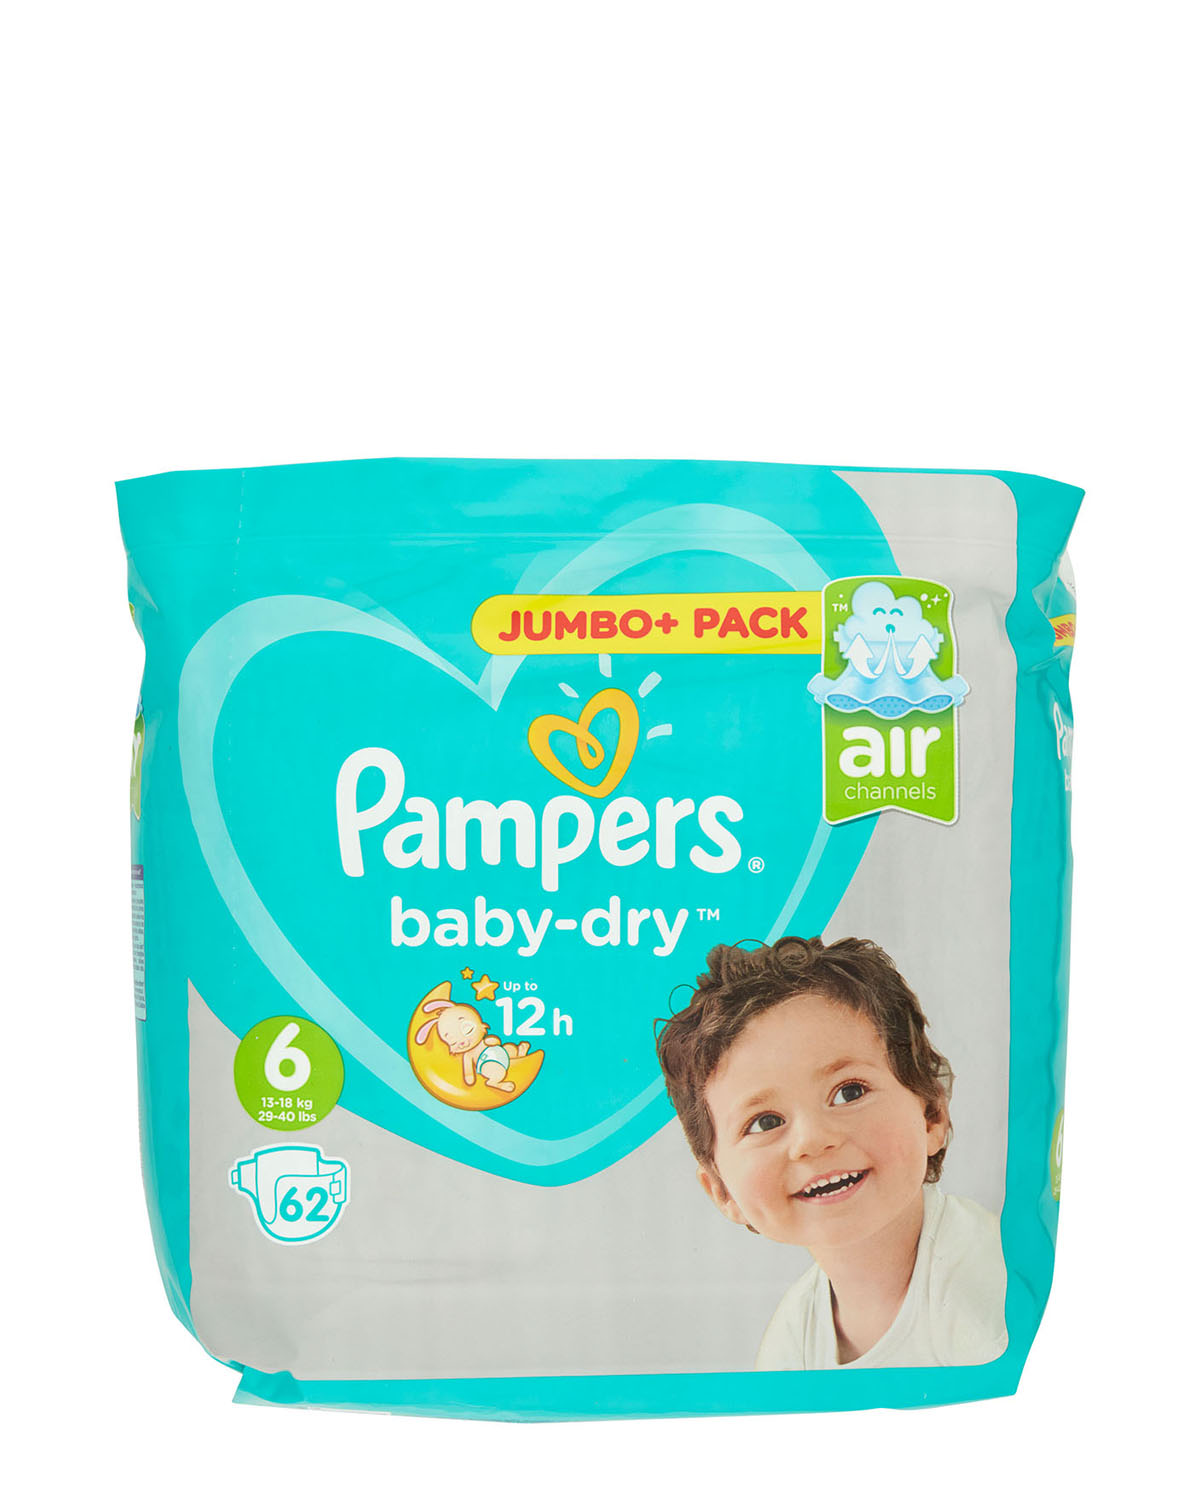 Pampers Baby Dry Size 6 Jumbo Plus - 62 Nappies